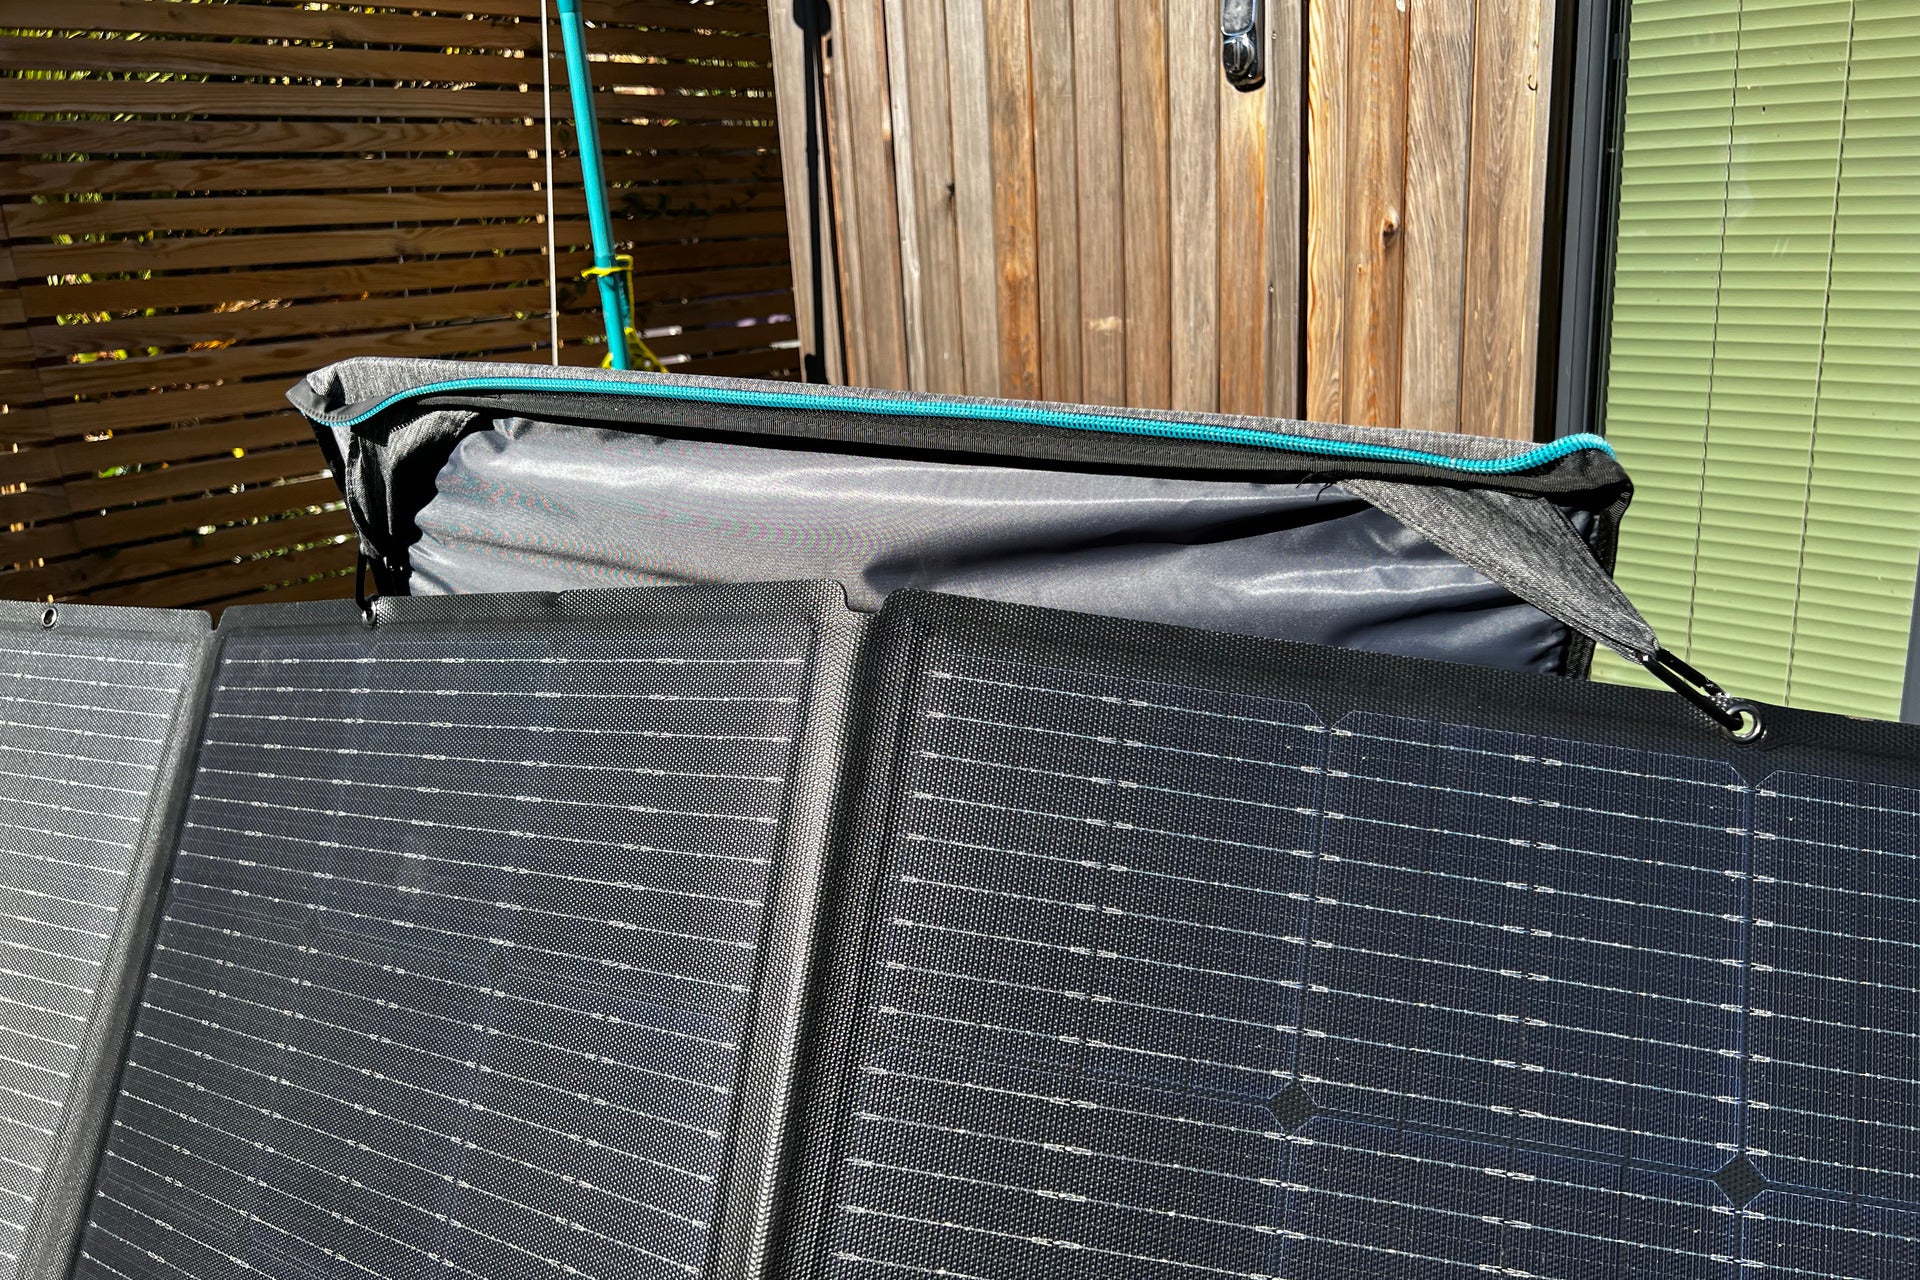 The EcoFlow Delta 2 case used as a solar stand